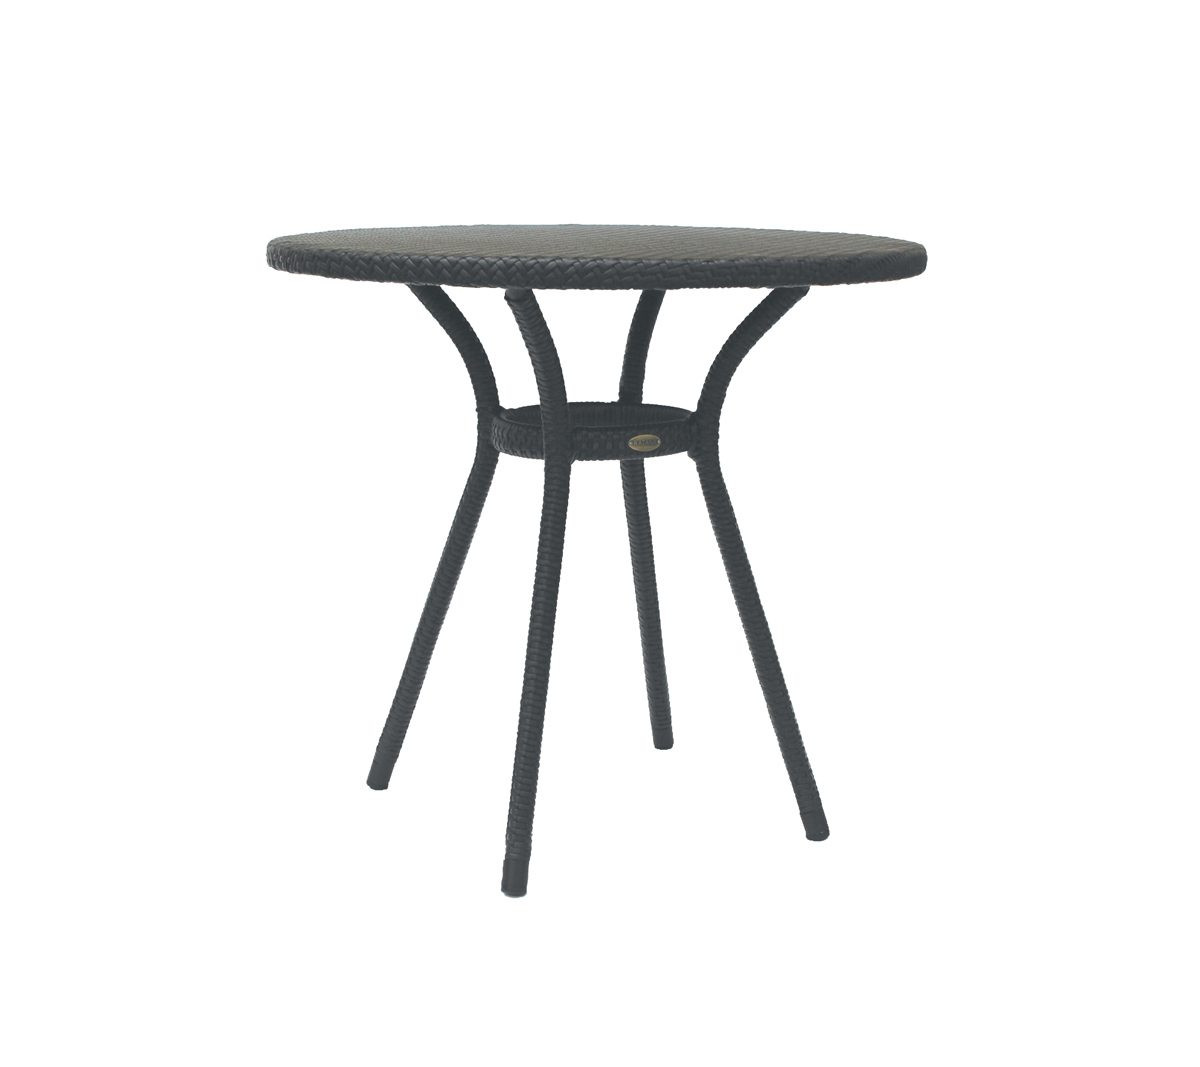 UNIVERSAL 32″ BISTRO TABLE W/MESH SUPPORT (KD)